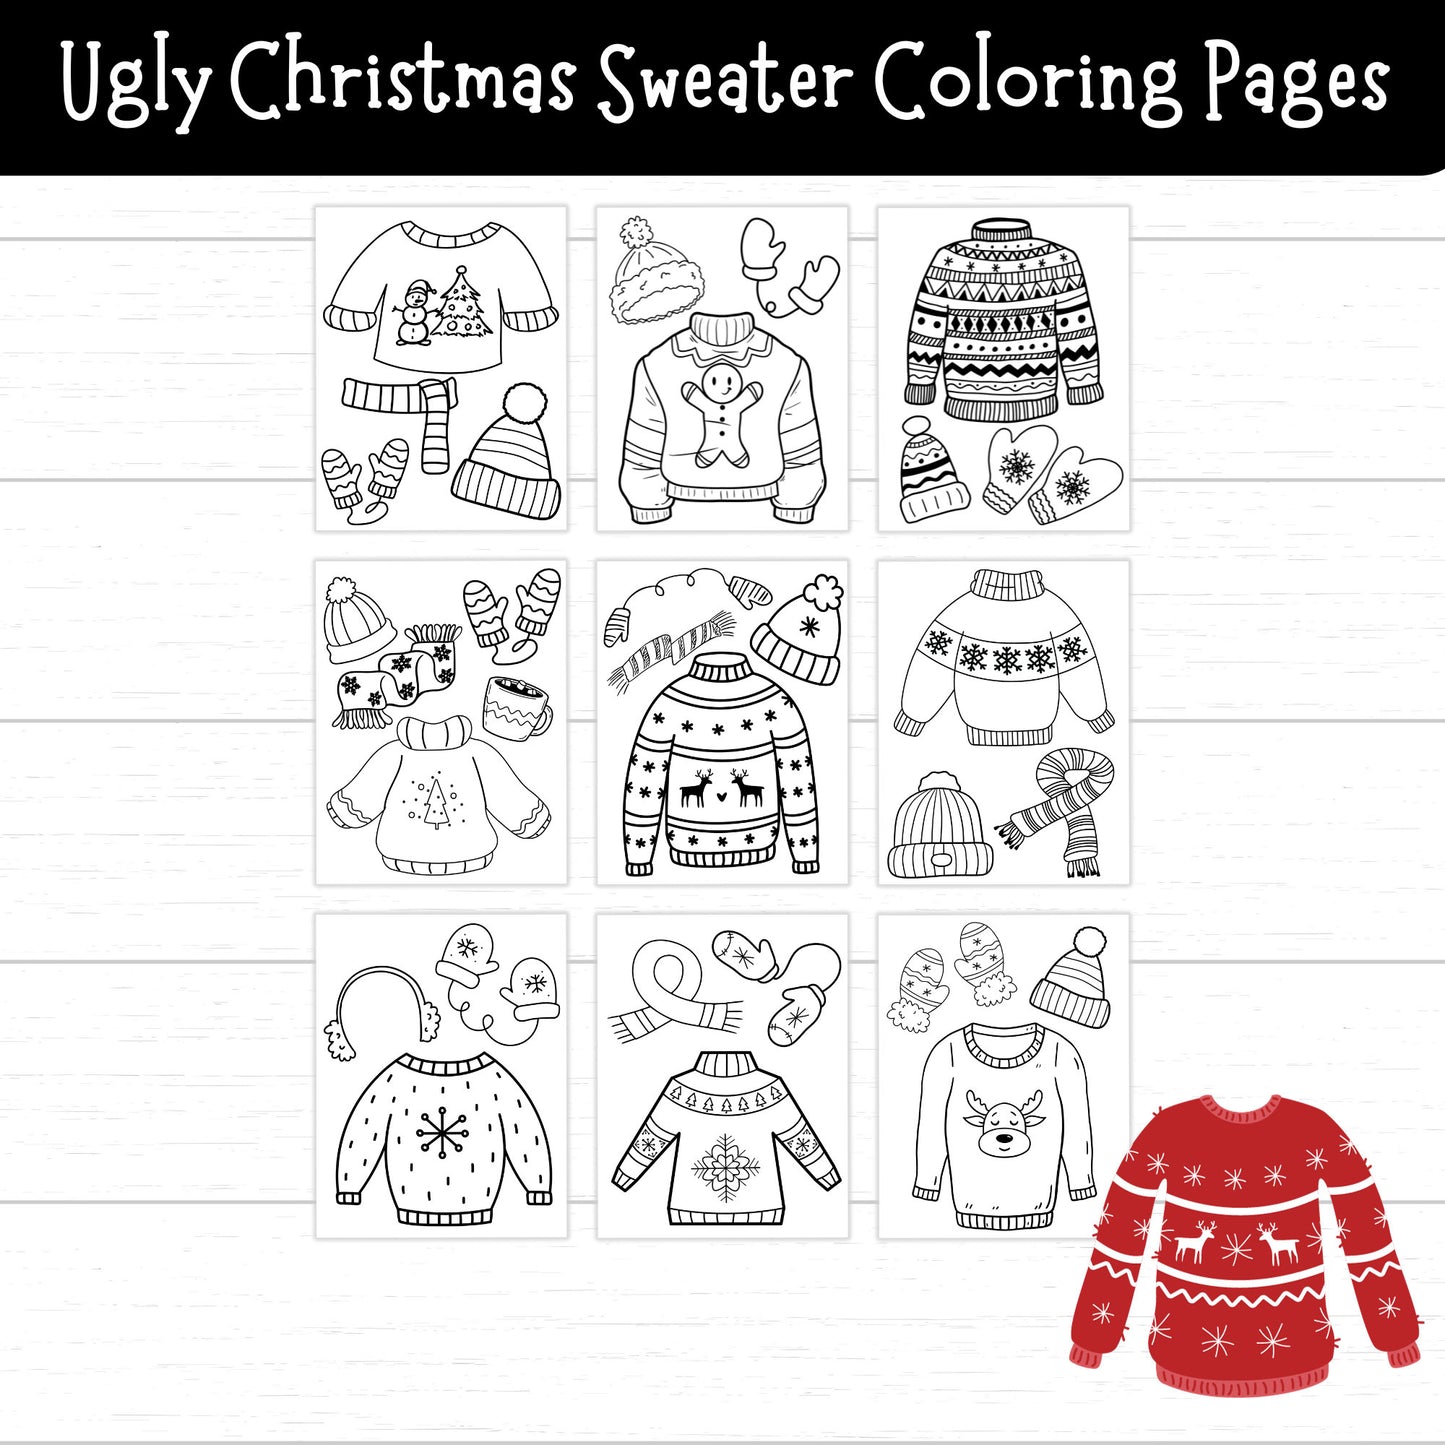 Ugly Christmas Sweater Coloring Pages, Ugly Christmas Sweater Activities, Christmas Printables for Kids, Christmas Coloring Pages